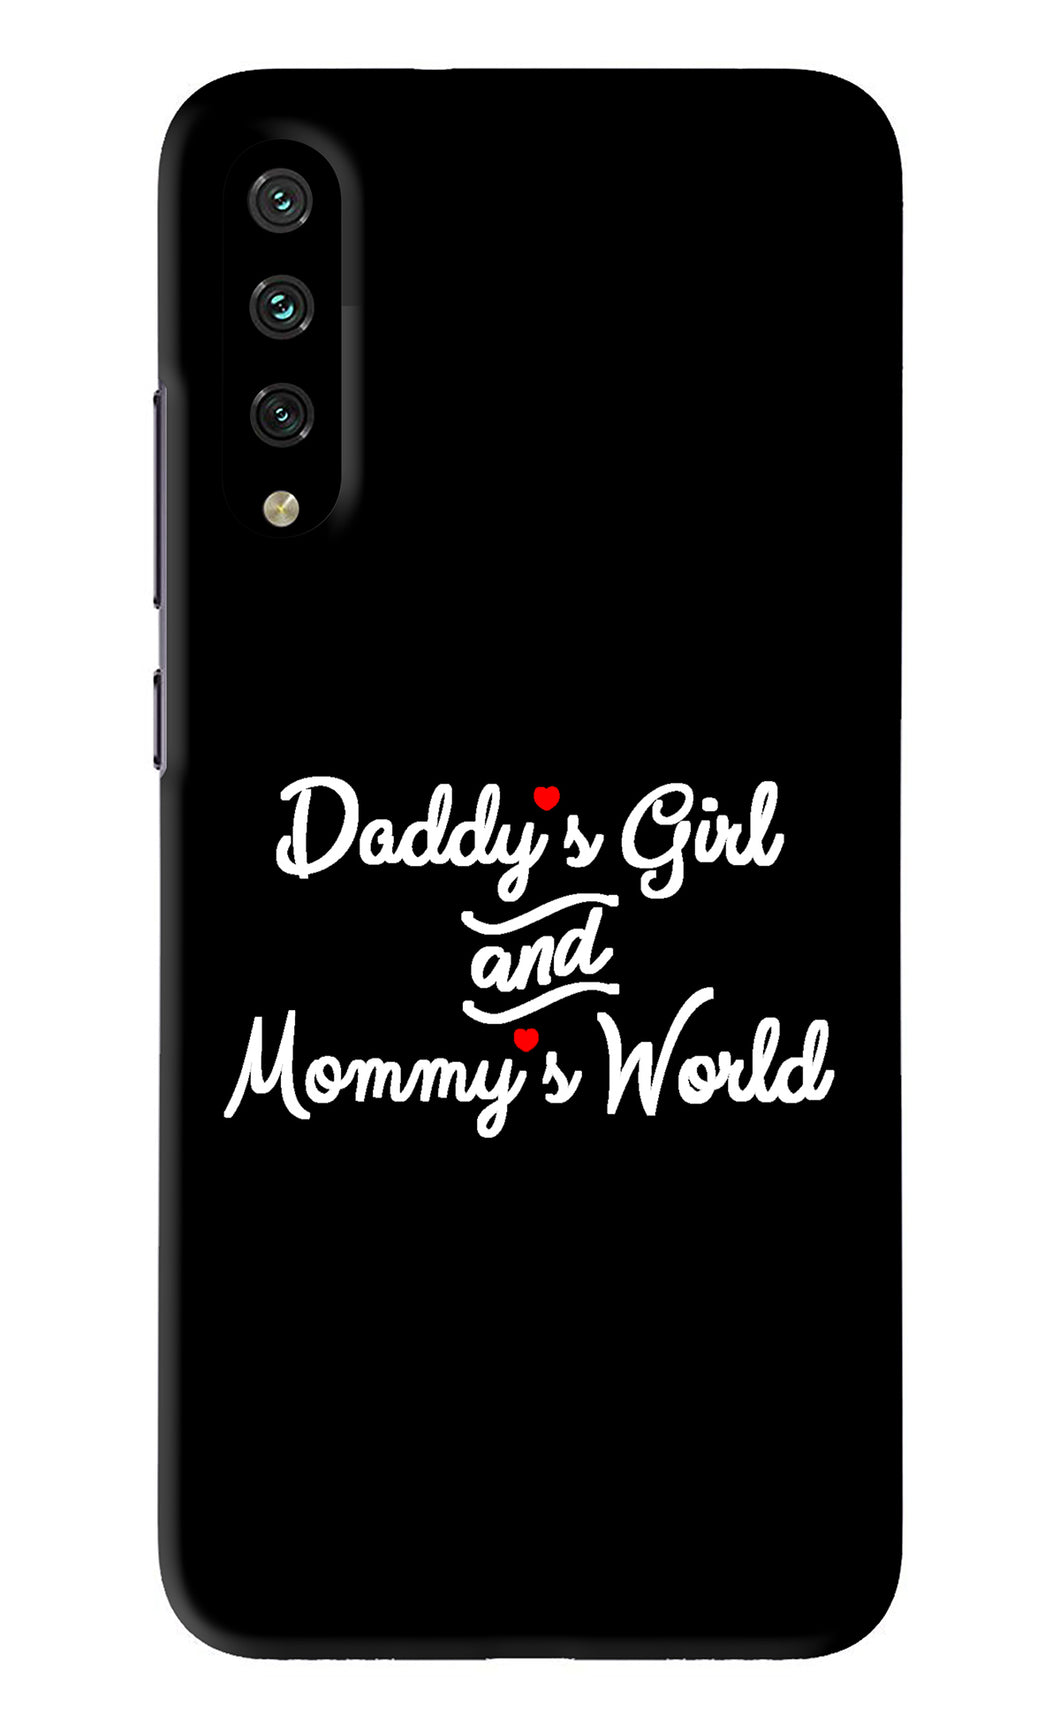 Daddy's Girl and Mommy's World Xiaomi Mi A3 Back Skin Wrap